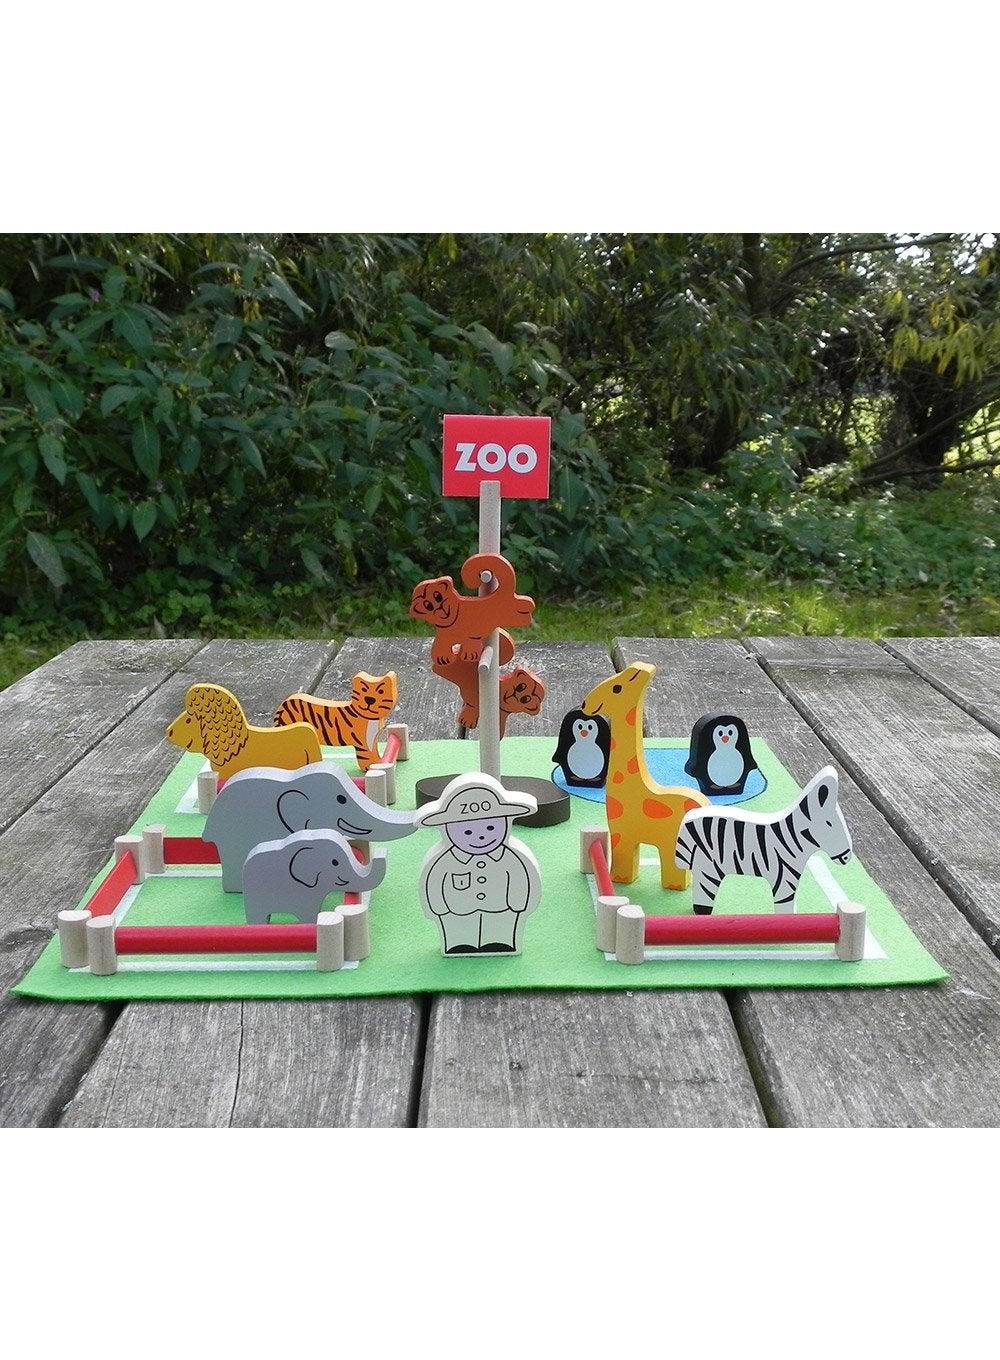 Apples to Pears Toy Zoo Kit - Trotters Childrenswear